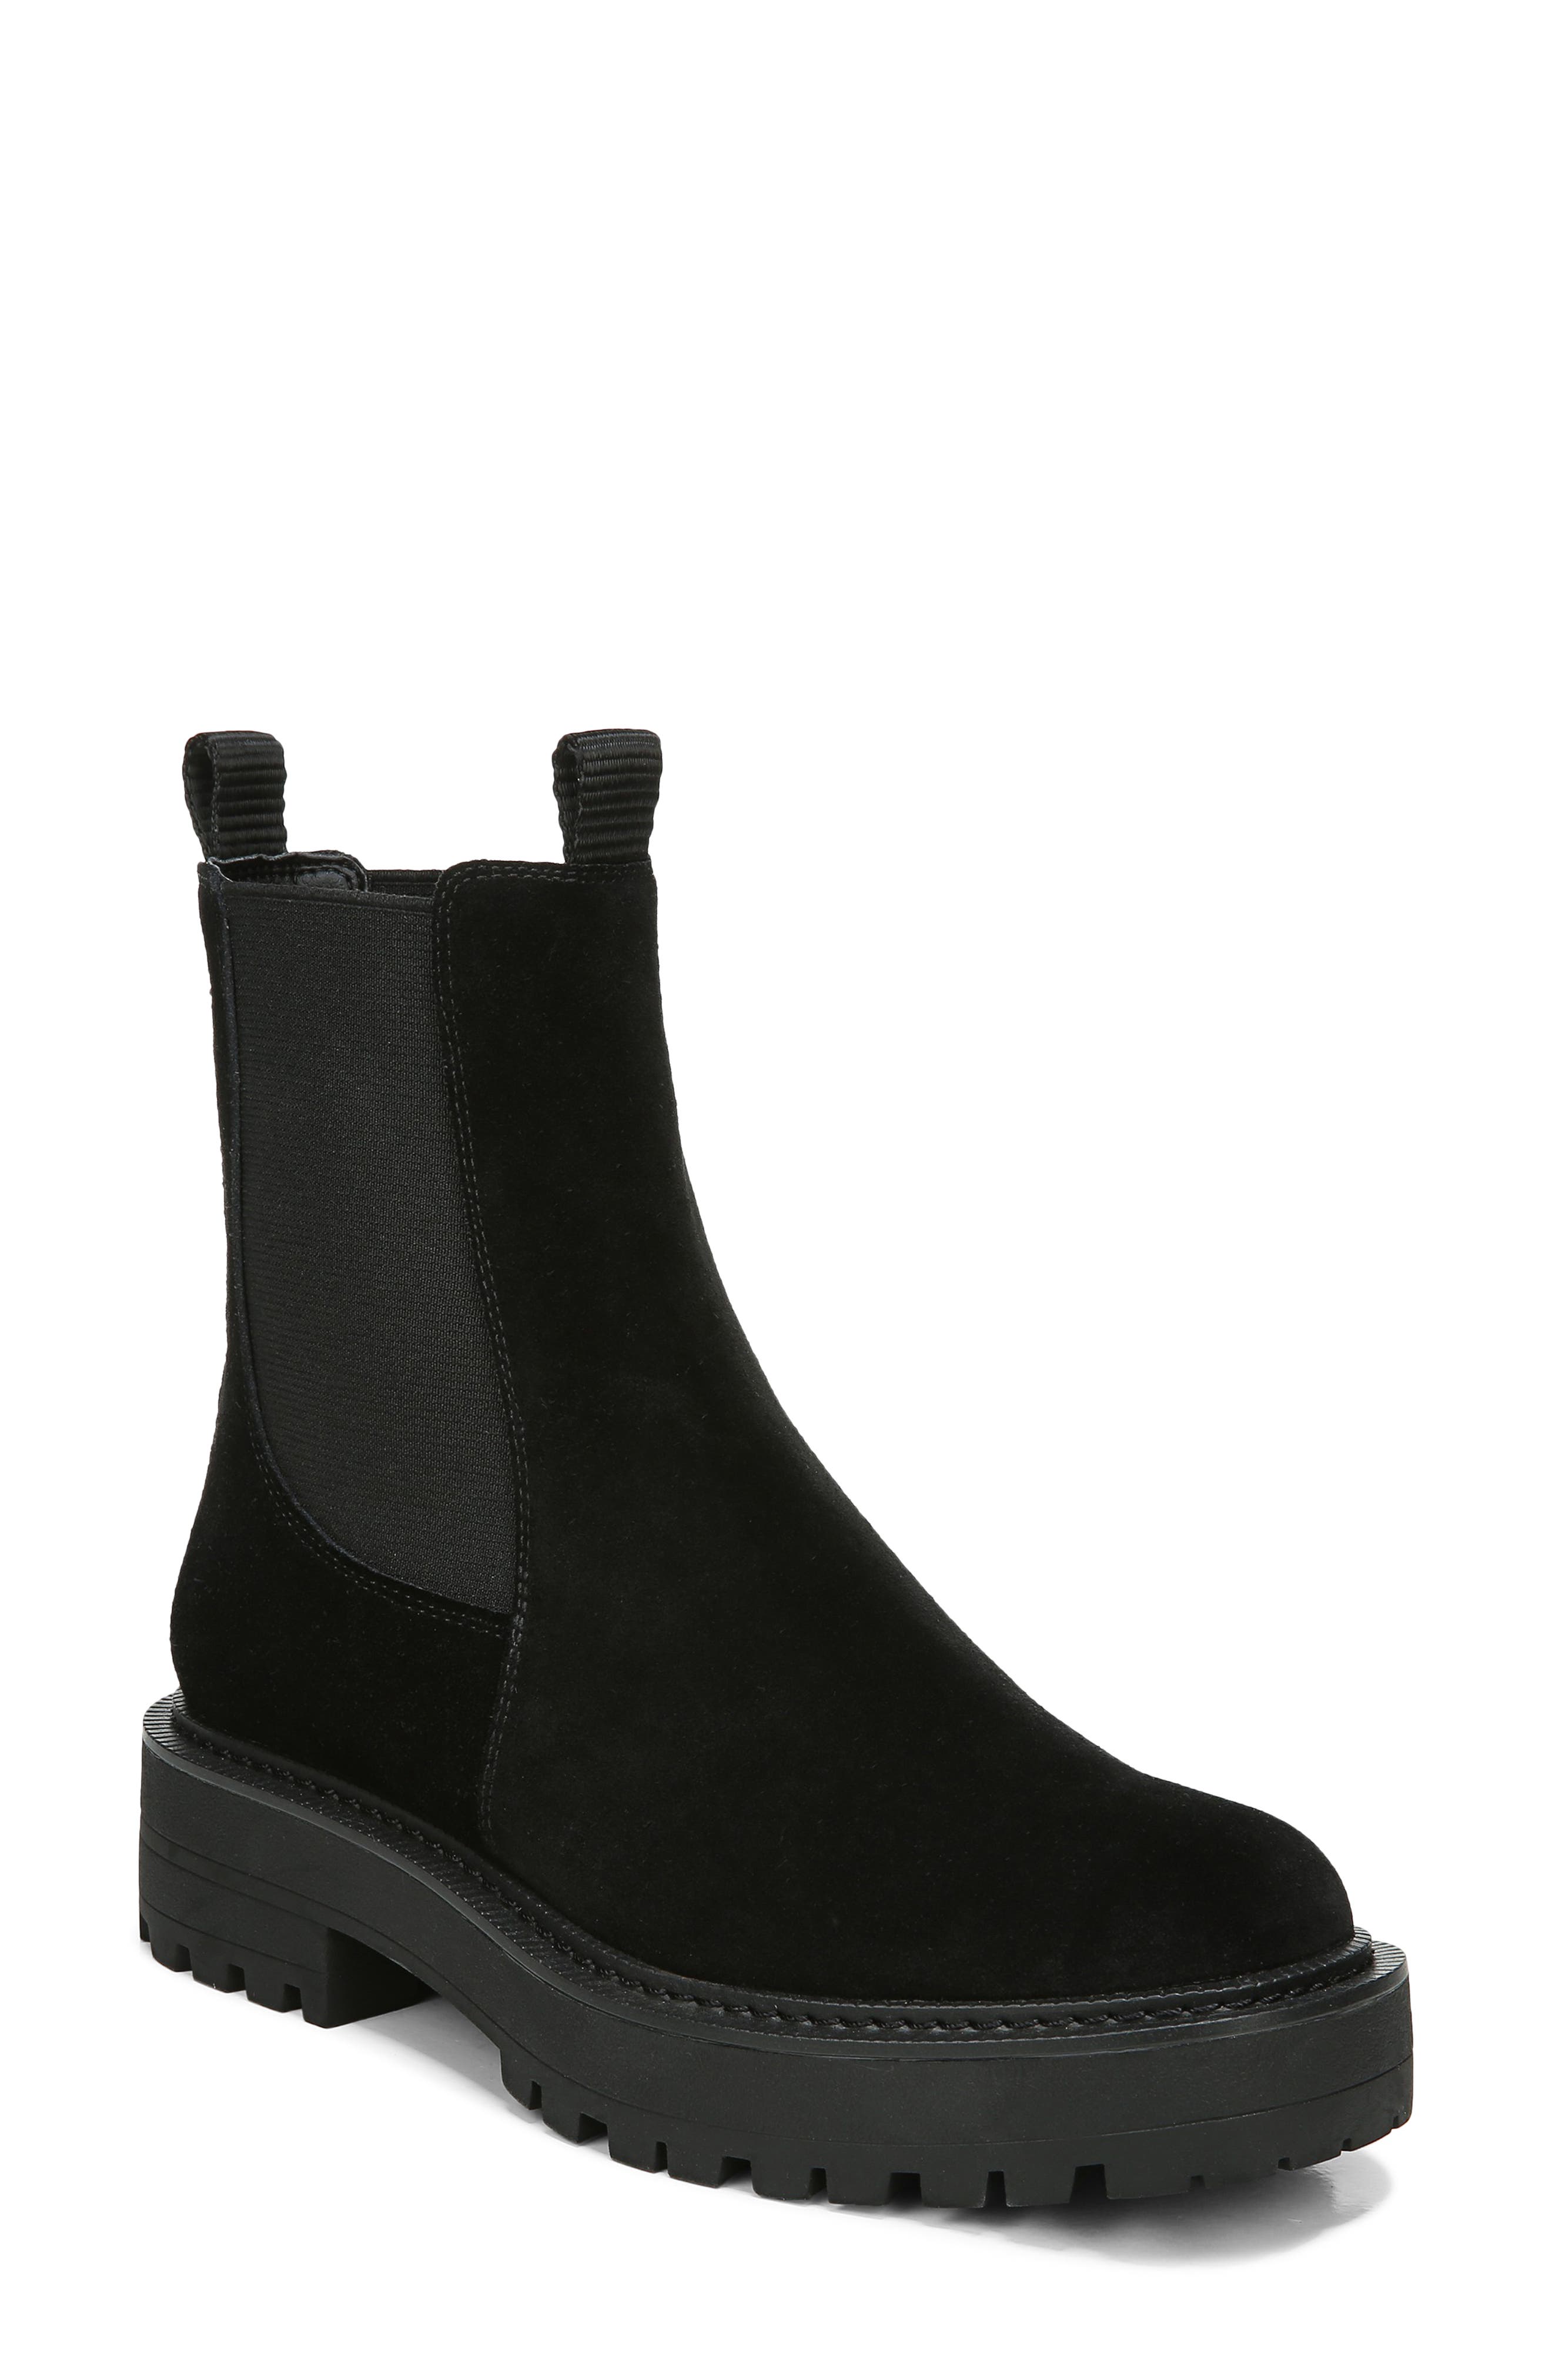 nordstrom low boots